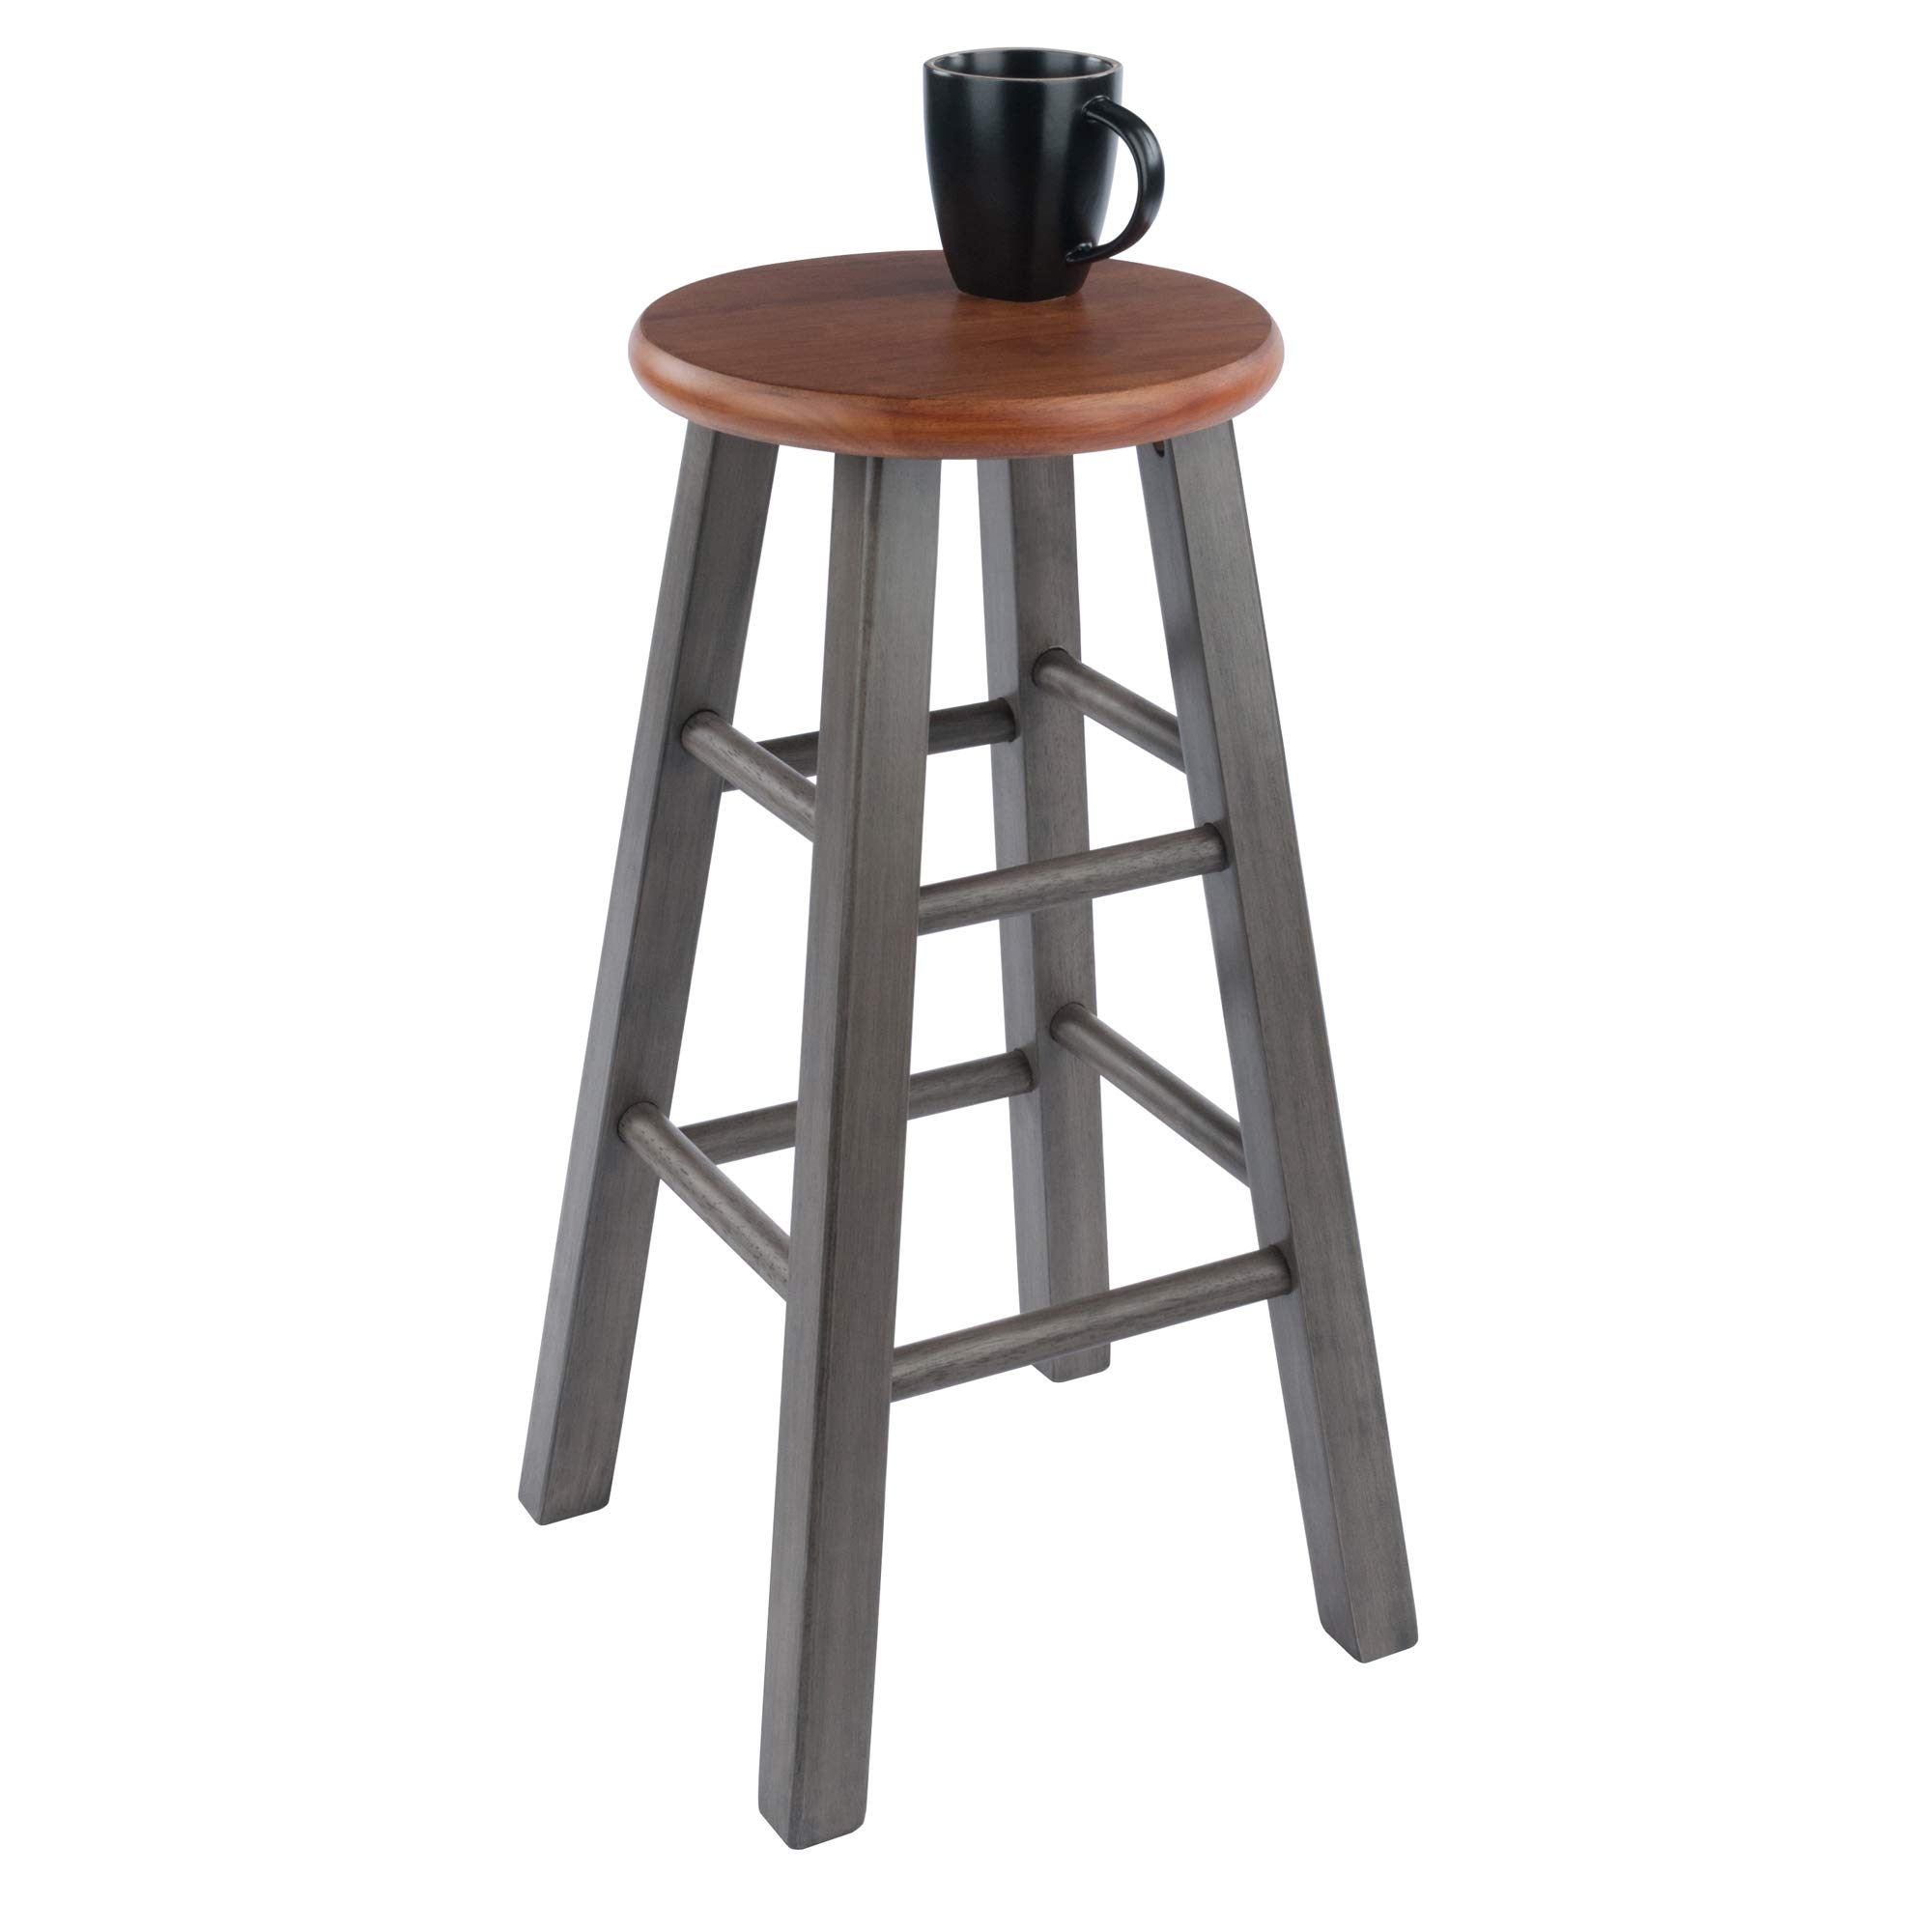 Winsome Wood Ivy 24" Counter Stool, Rustic Gray & Teak Finish - image 2 of 3